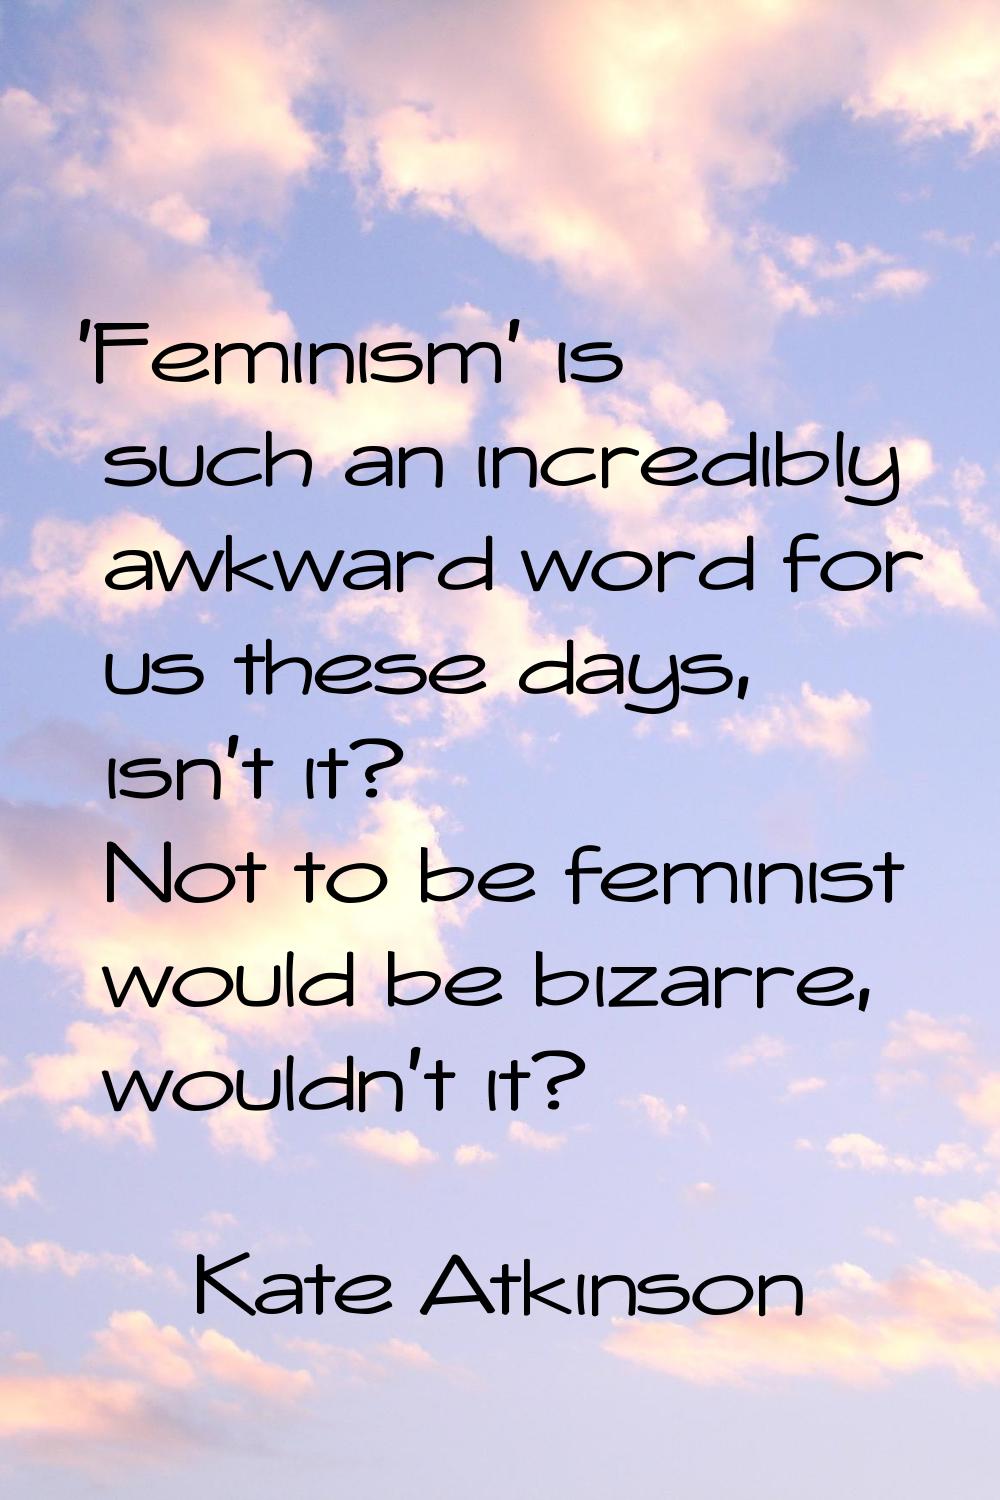 'Feminism' is such an incredibly awkward word for us these days, isn't it? Not to be feminist would